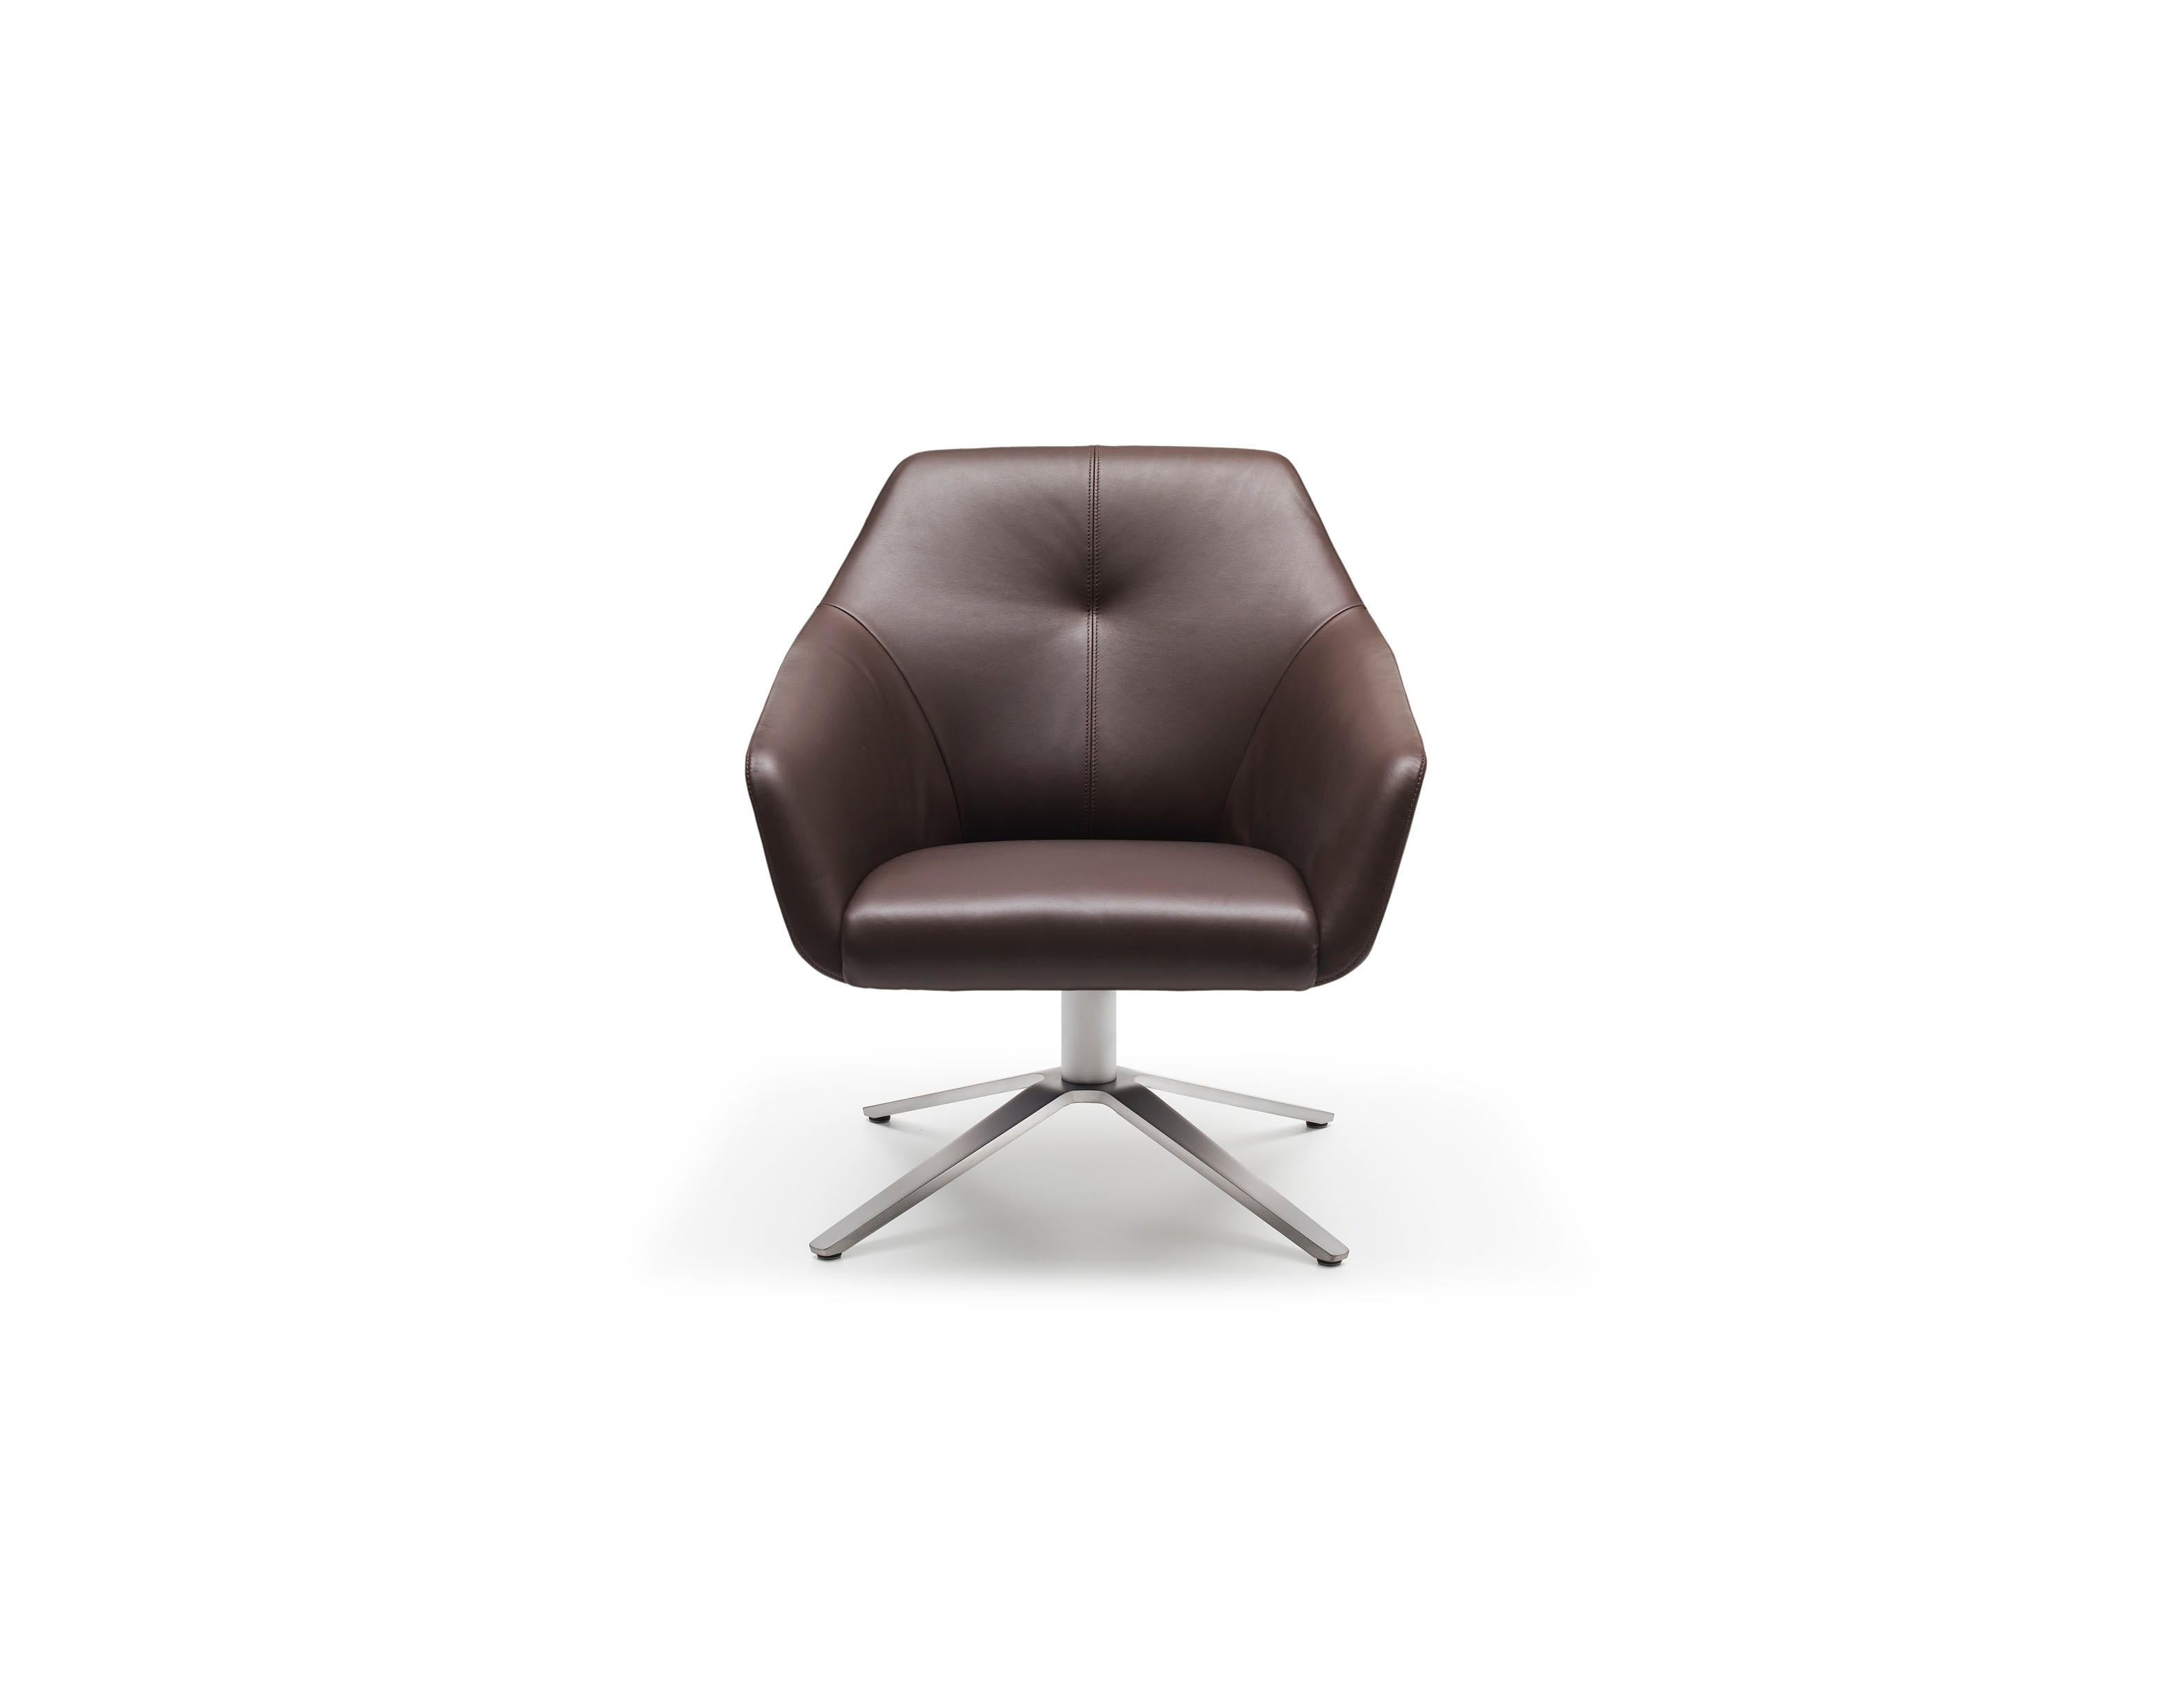 DS-278 armchair by De Sede
Designer: Christian Werner
Dimensions: 76 x 76 x 56 
Materials: SEDEX upholstery with SEDE-Lux covering. Seat: Metal frame with integrated straps; back: moulded foam with metal parts.
Prices may change according to the